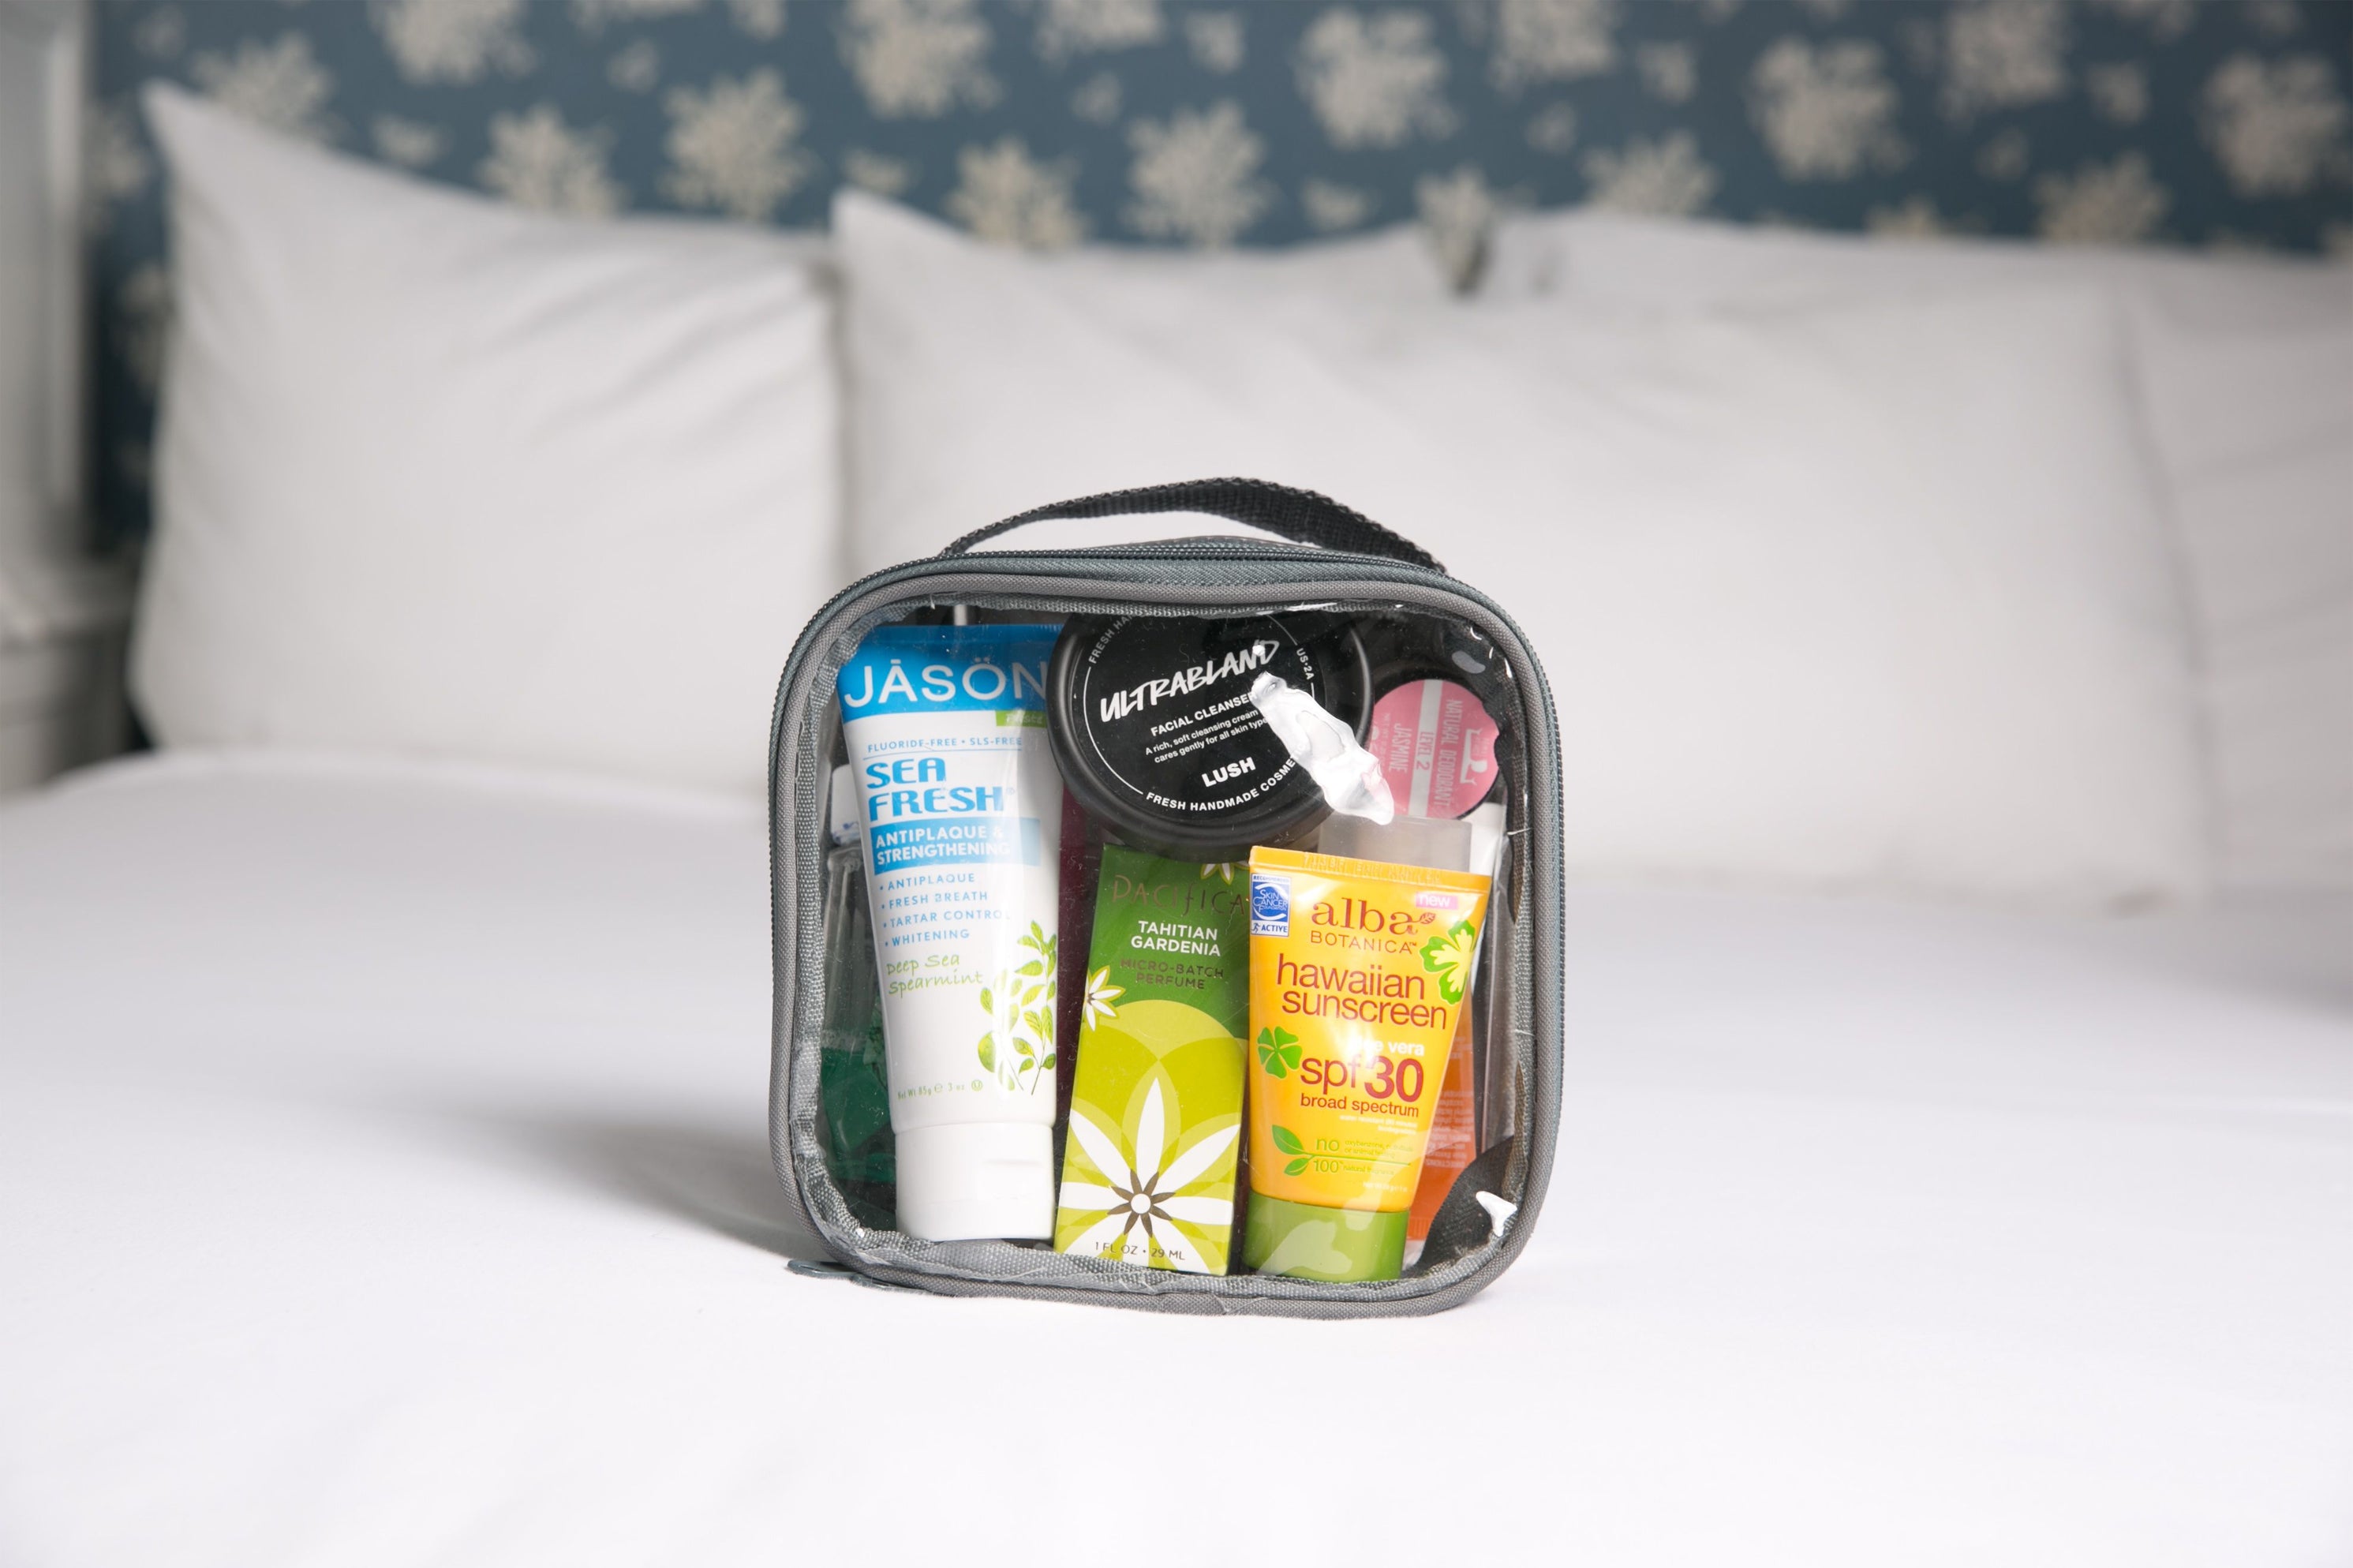 The Best Toiletry Bags for Women + FREE Checklist! – EzPacking